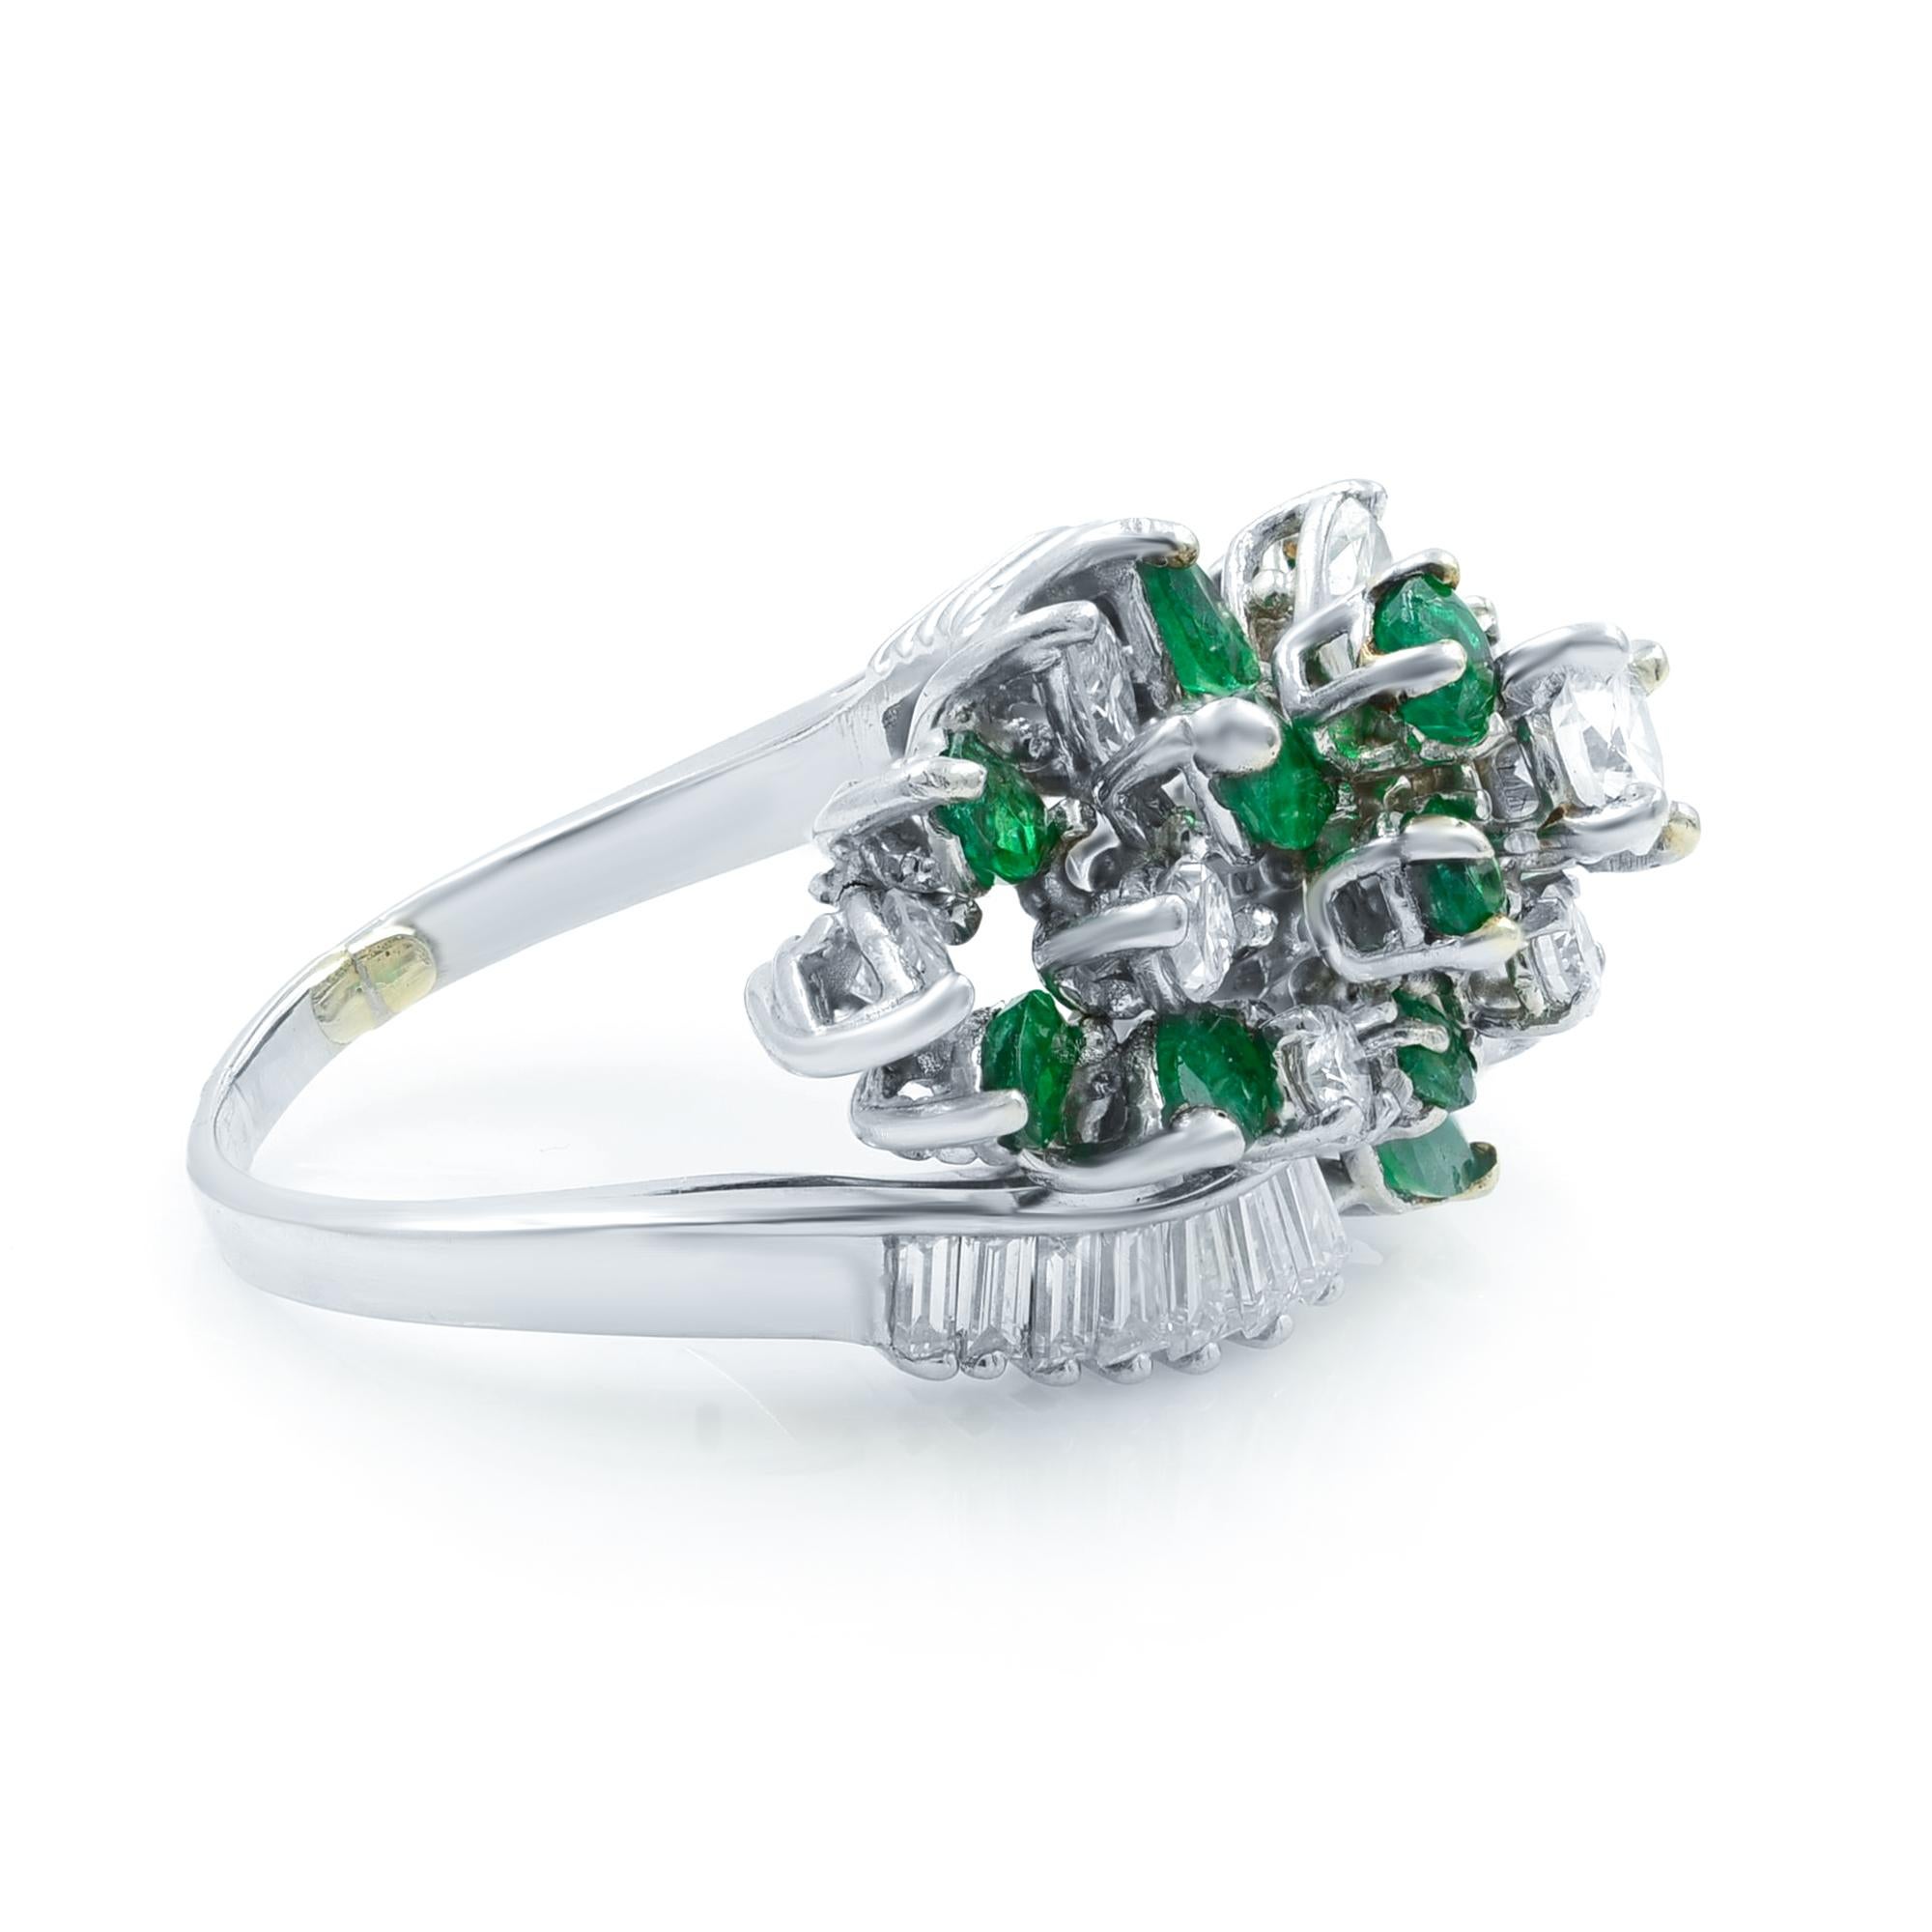 Seven bright white and sparkling marquise-cut diamonds, totaling 1.30 carats, mixed up with as many bright rich green emeralds in this strikingly beautiful cocktail ring, circa 1960s-70s, finely hand-fabricated in platinum. Splashy, flashy and fun!